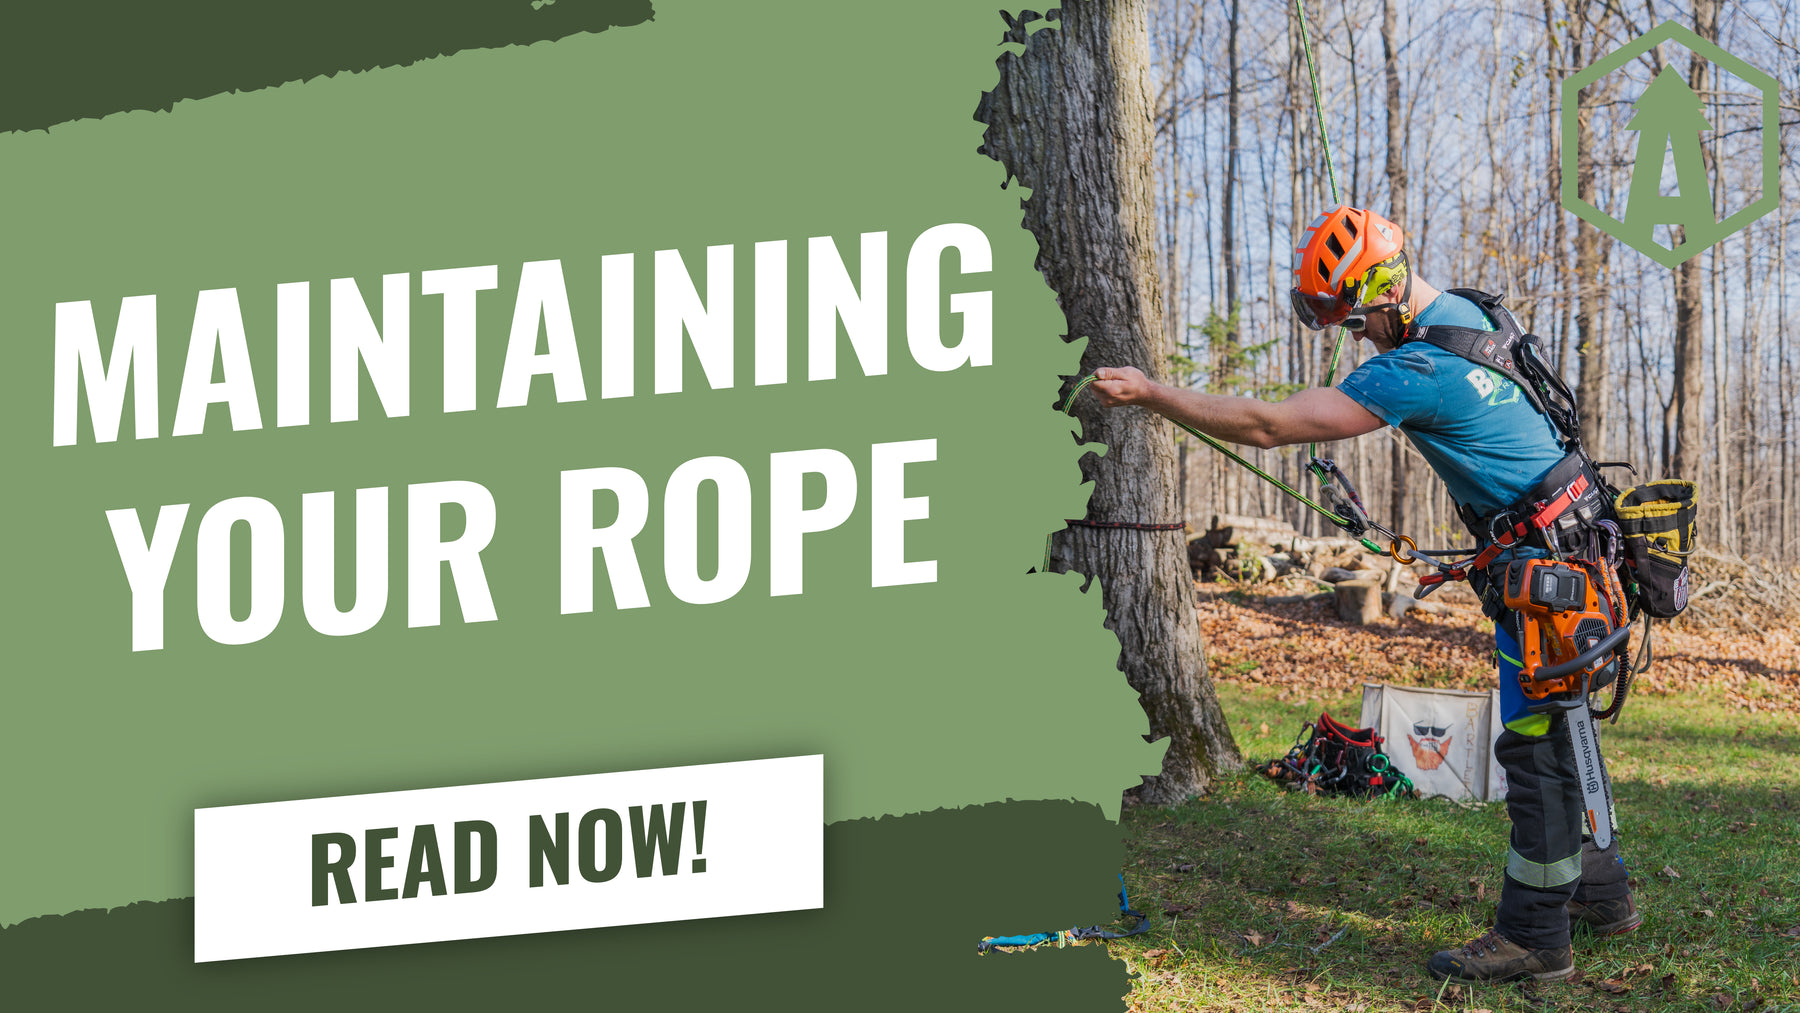 We need it! A guide to maintaining your rope.